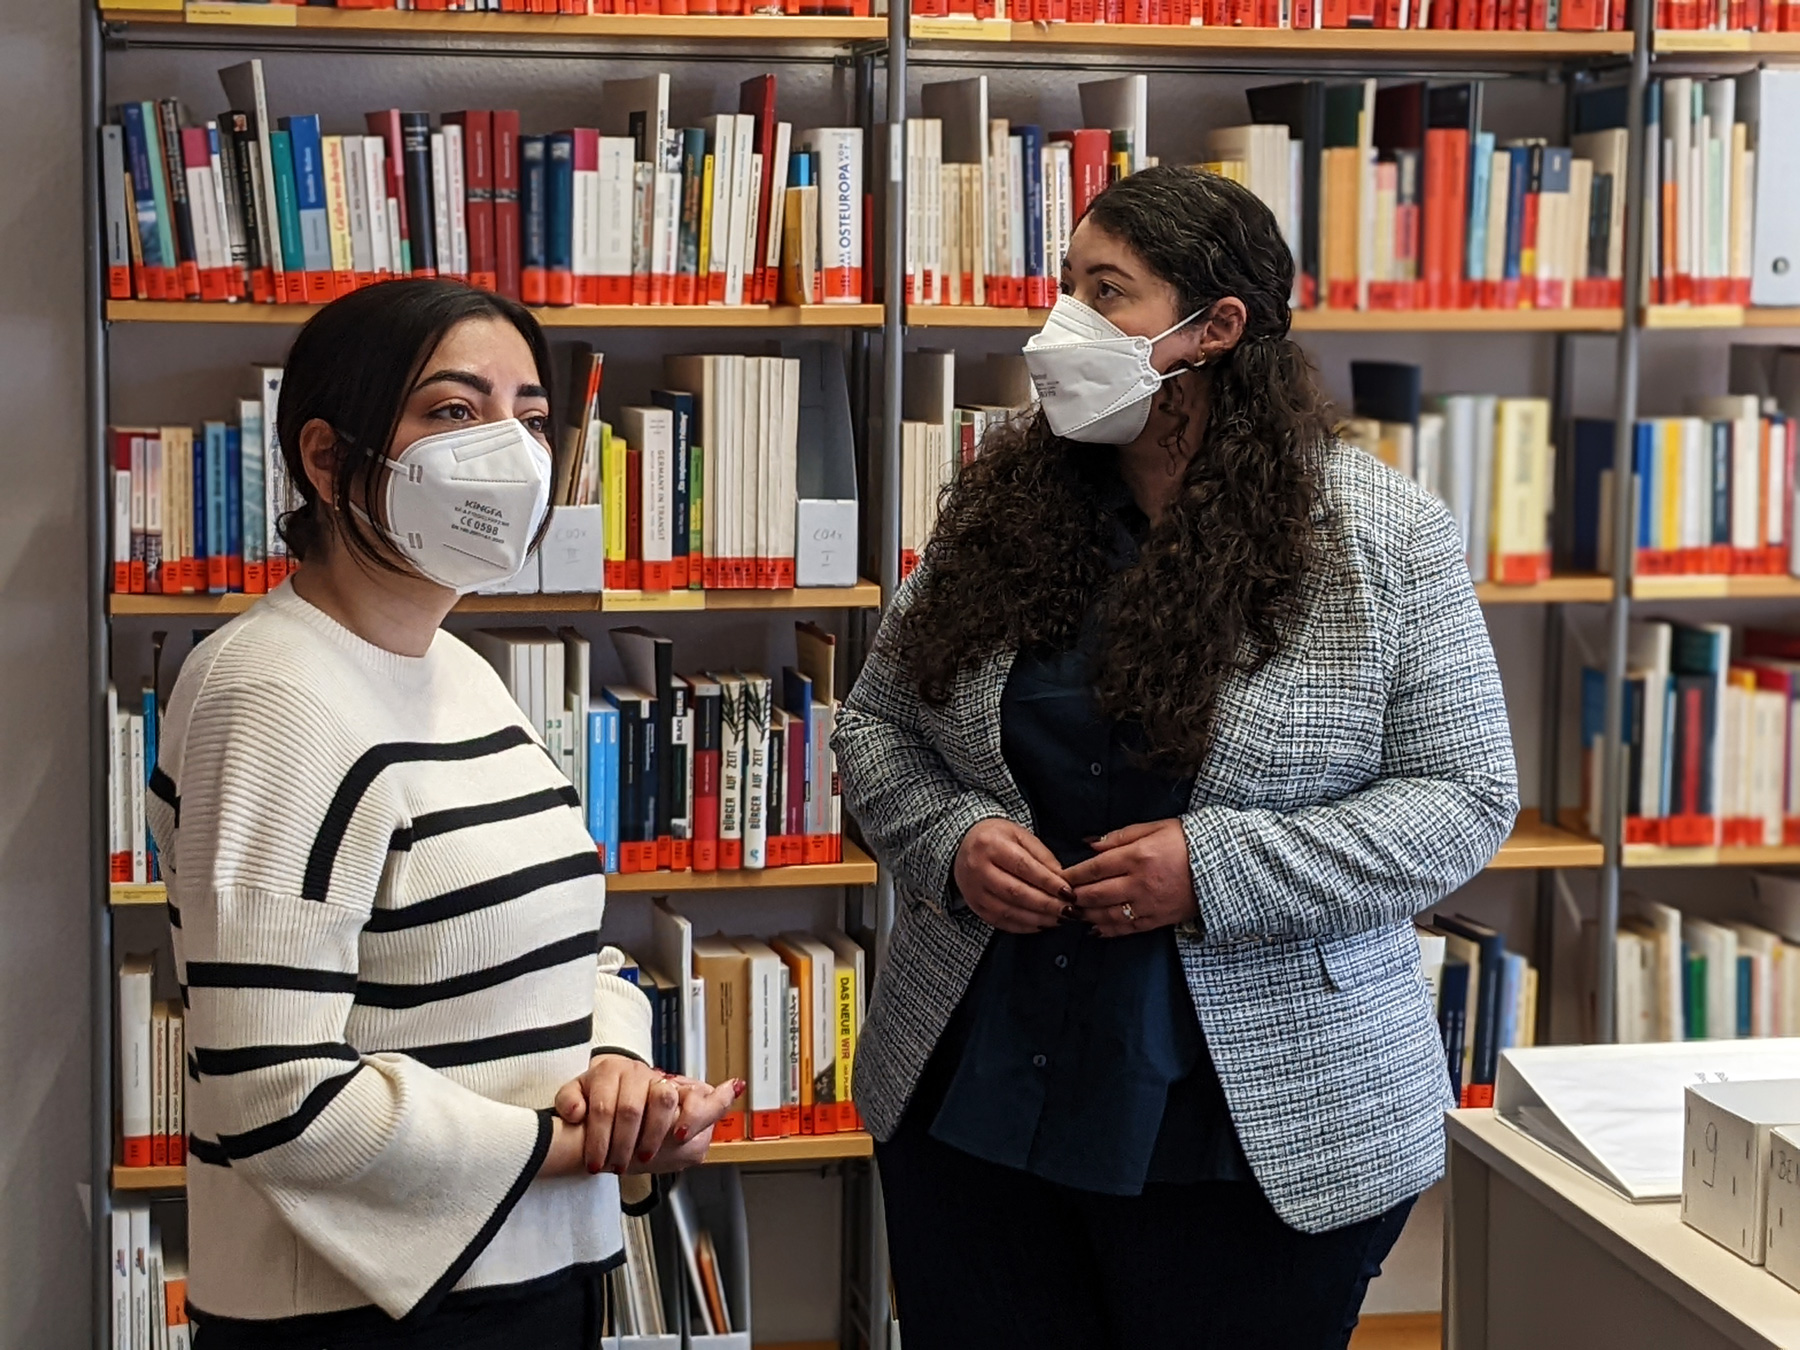 Reem Alabali-Radovan and Sanae Abdi in the DOMiD library, which has many special titles on migration and gray literature.